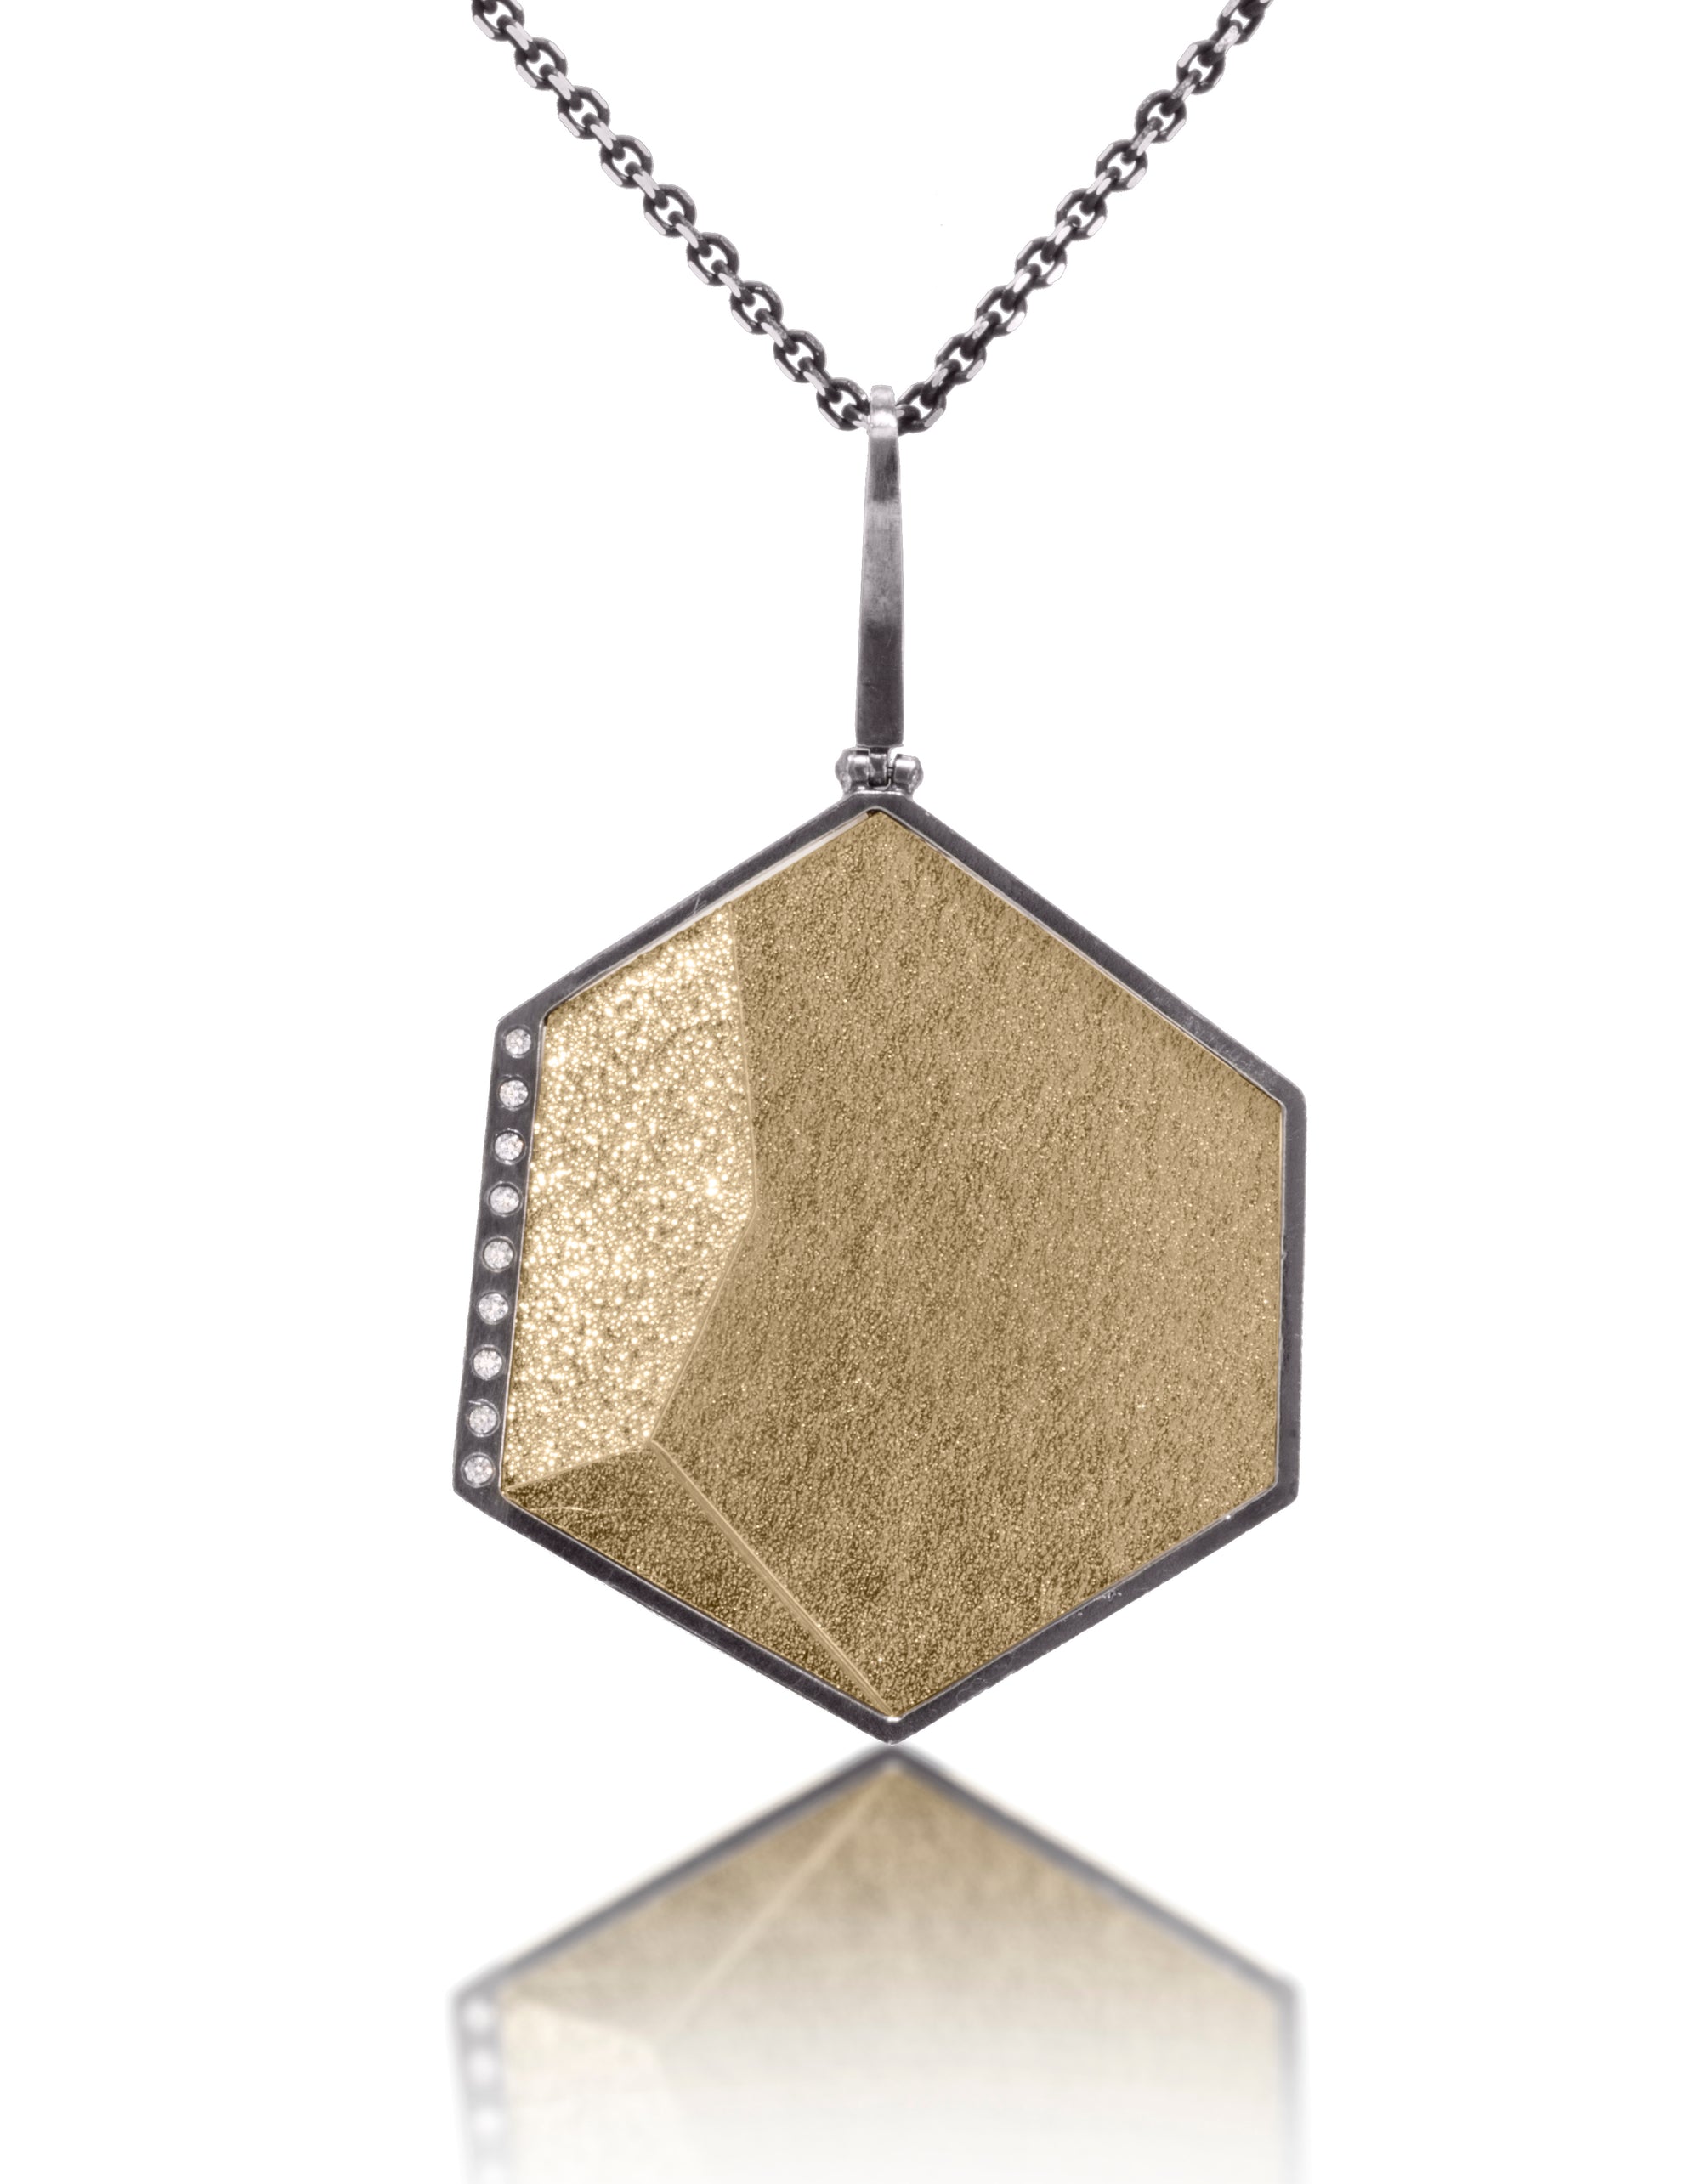 This oxidized sterling silver and richly textured 18k bimetal pendant is flush set with ideal cut white diamonds.  Accent facet glitters with the texture of diamond facets, individually scored and textured. Size large.  Available in oxidized silver bail, 3.25mm, fixed elongated and elongated enhancer bail styles.  0.0621 tcw